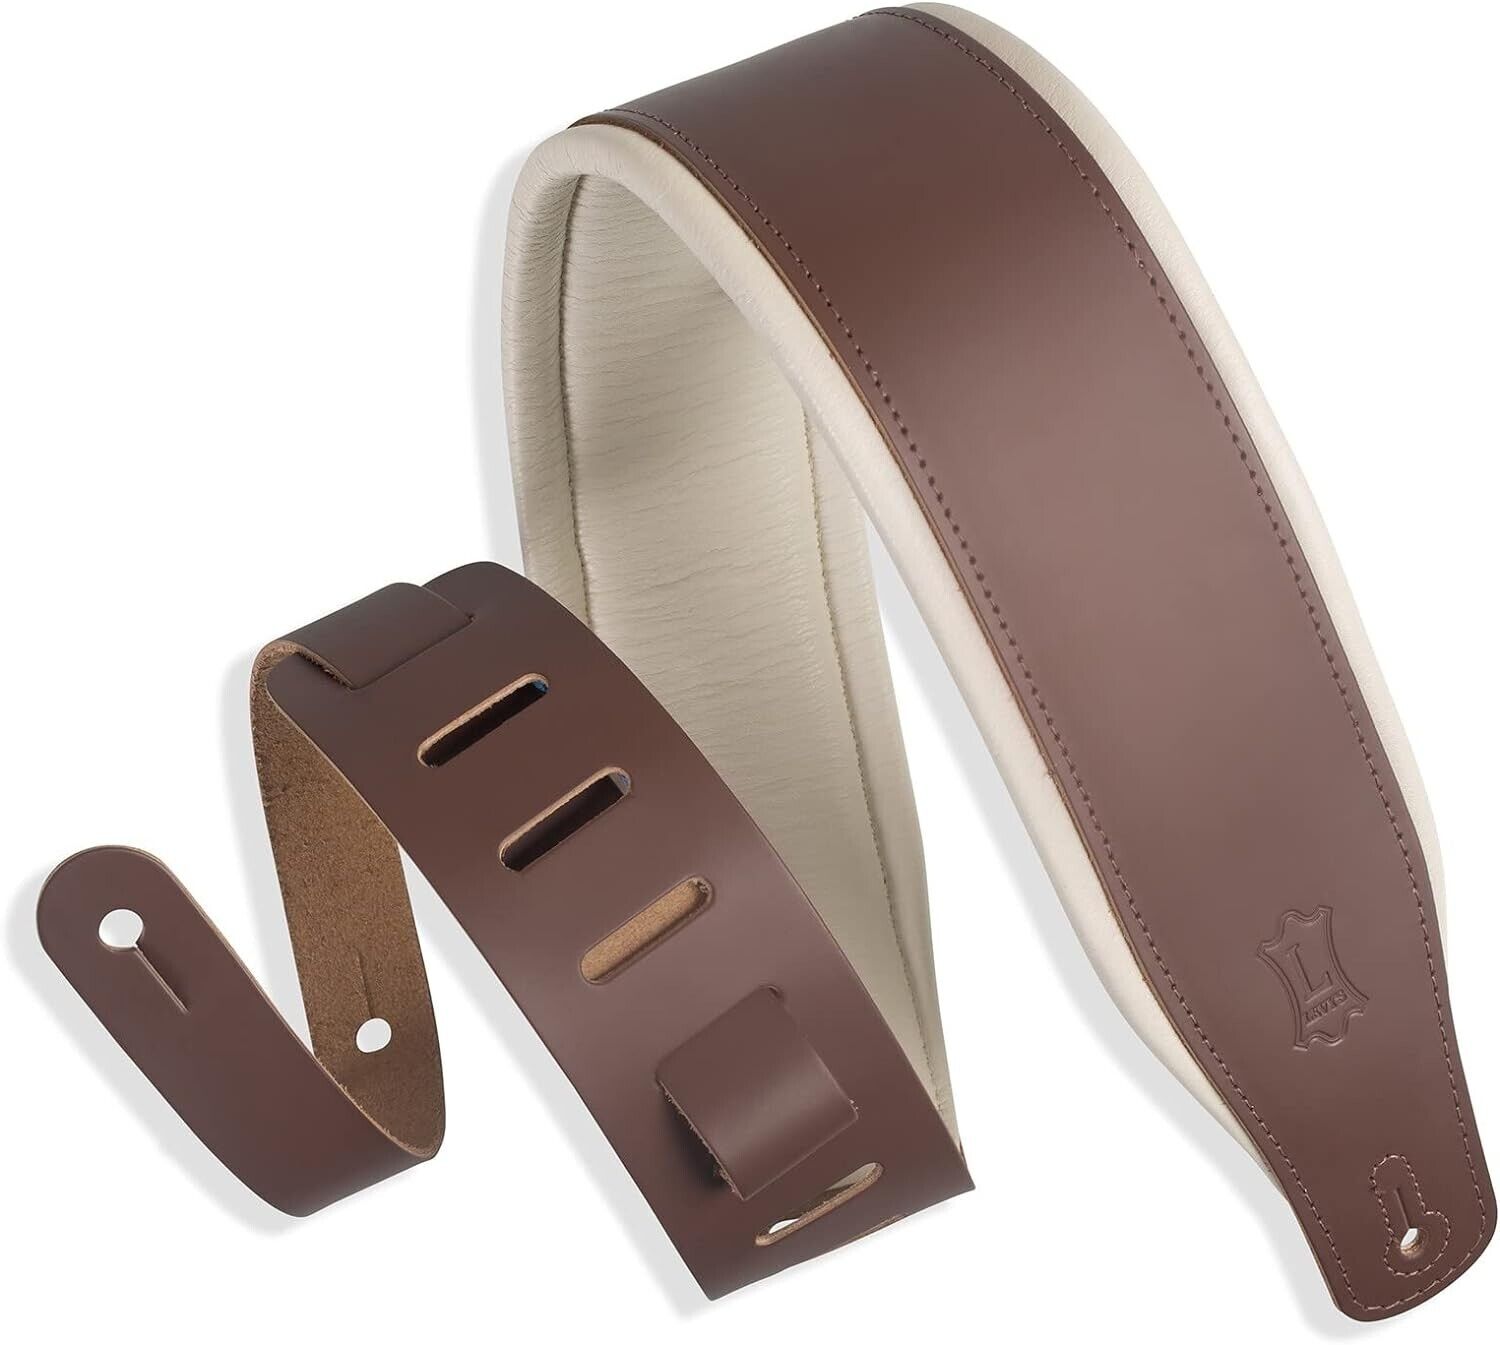 Levy’s M26PD - 3" Top Grain Leather Guitar Strap with Foam Padding, Brown/Cream